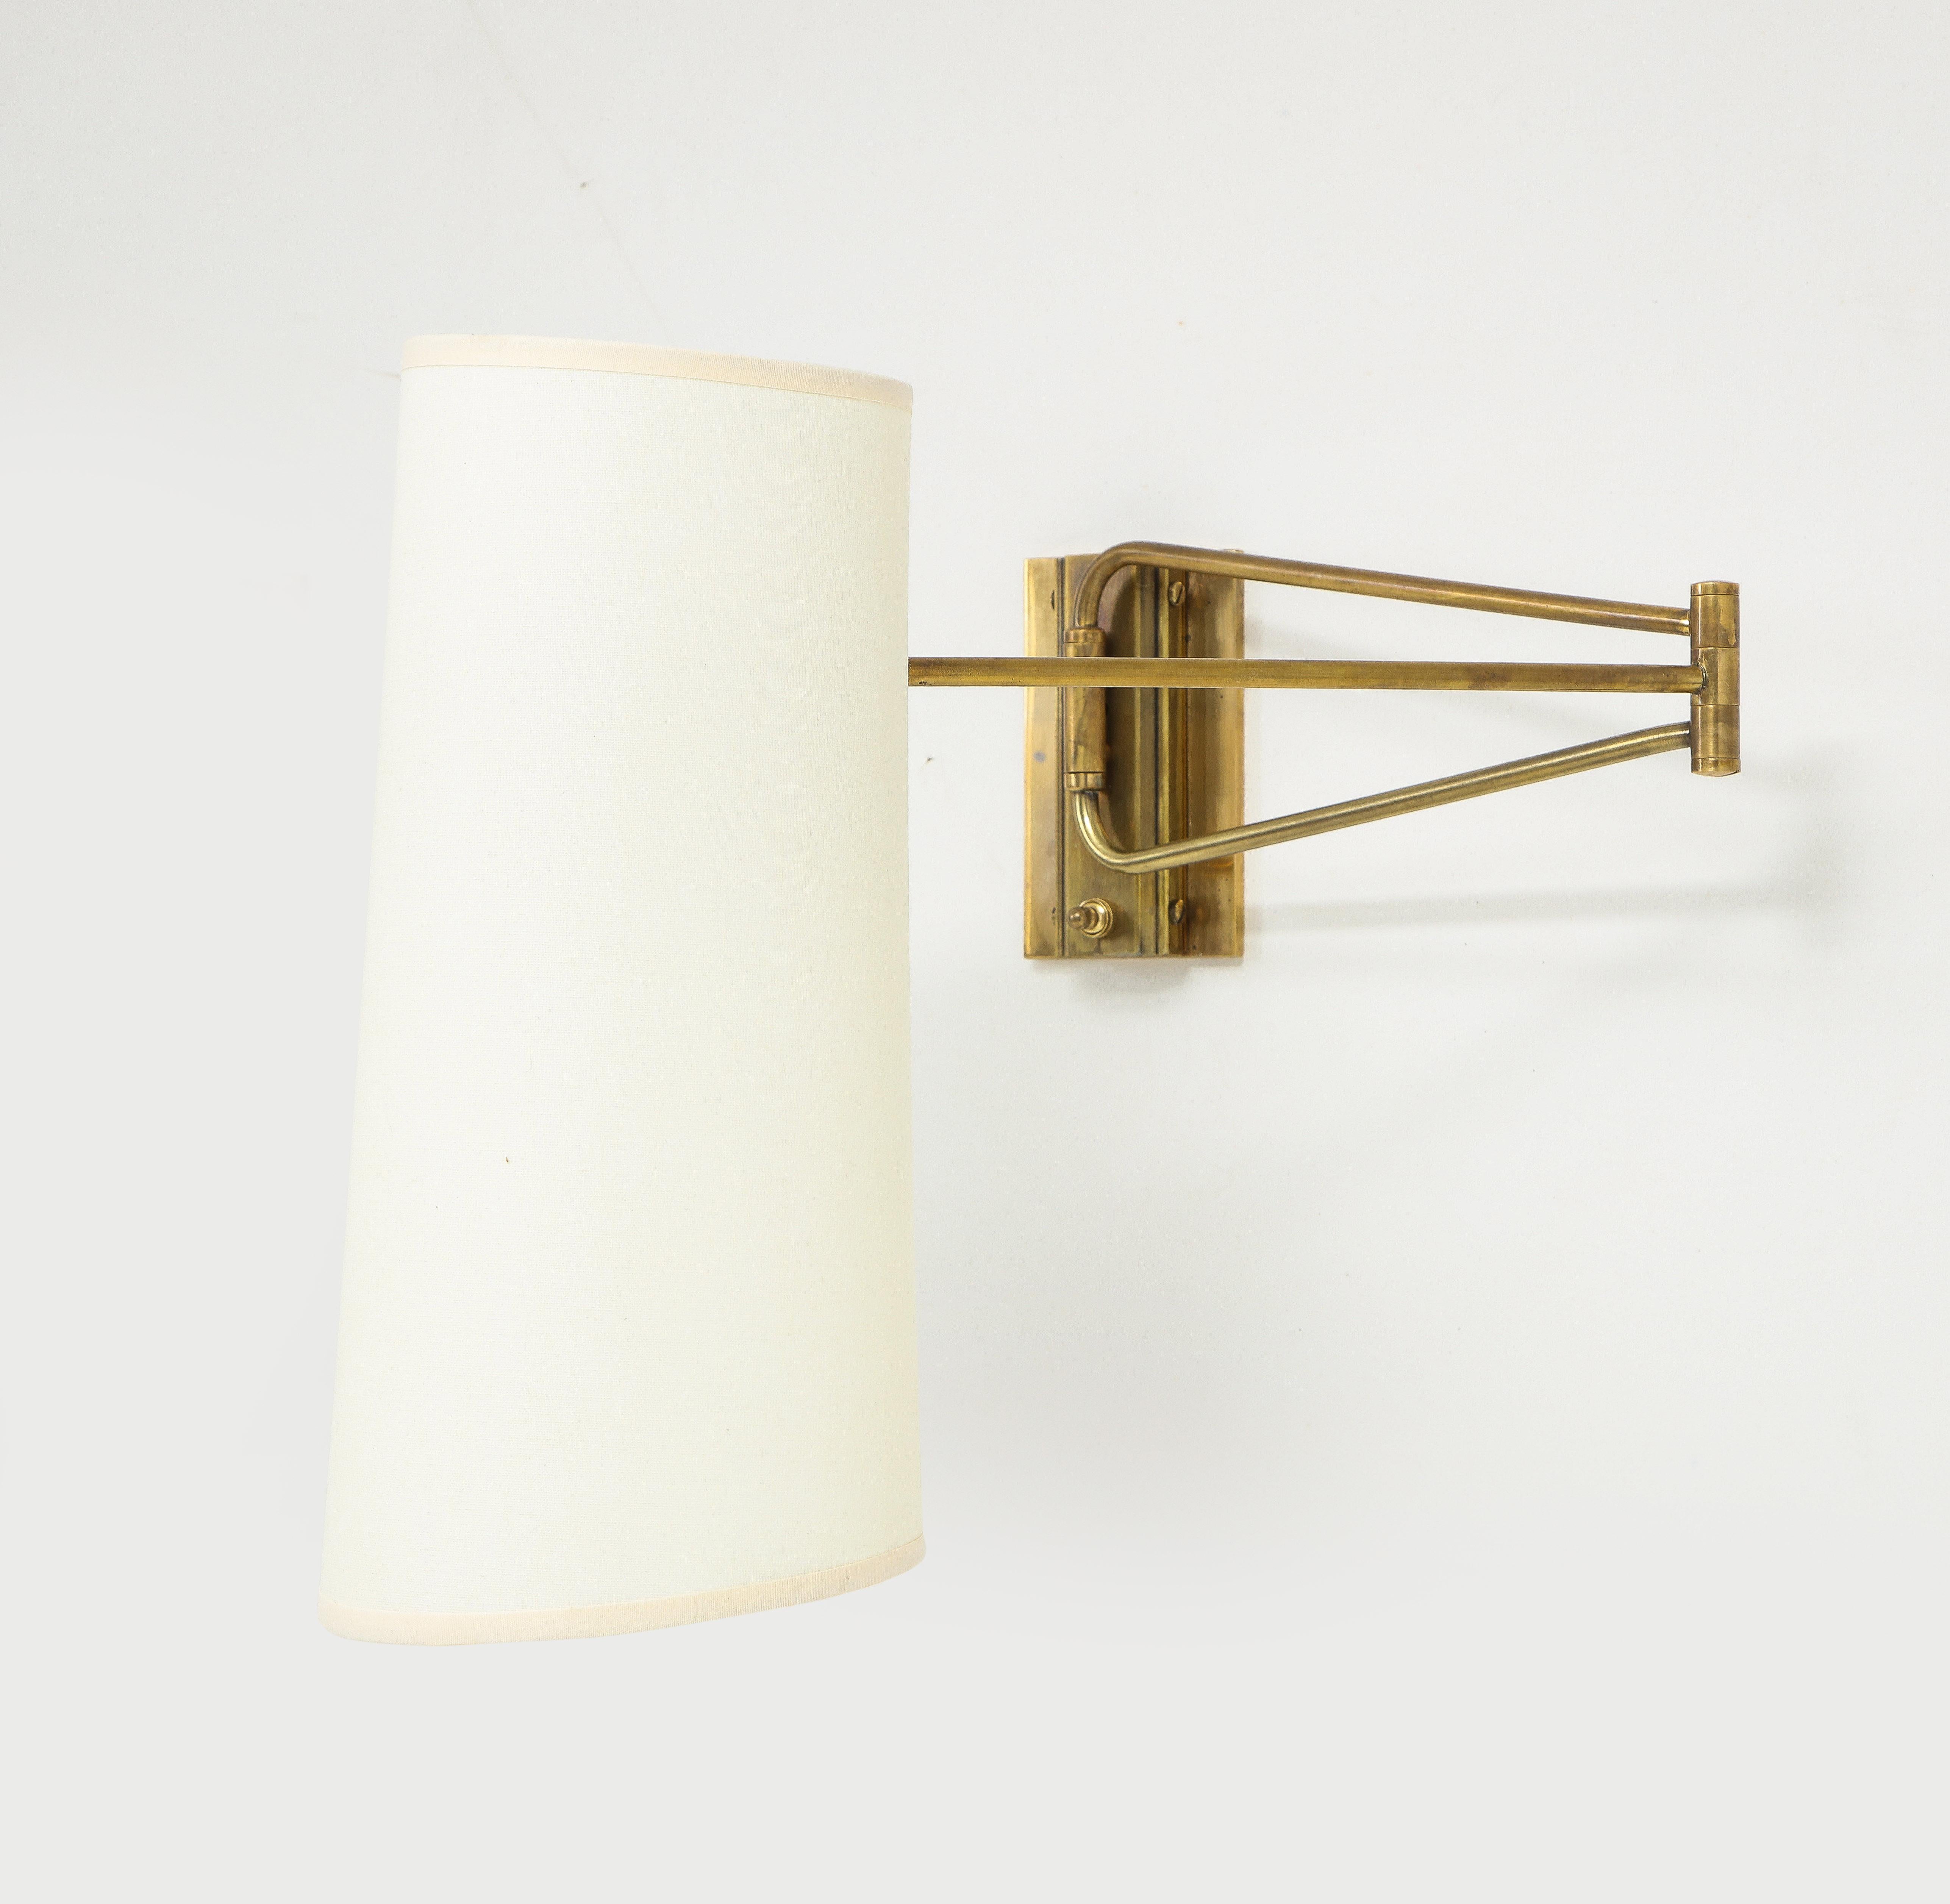 Pair of Brass Lunel Swingarm Sconces with Paper Shades, France 1960's For Sale 2